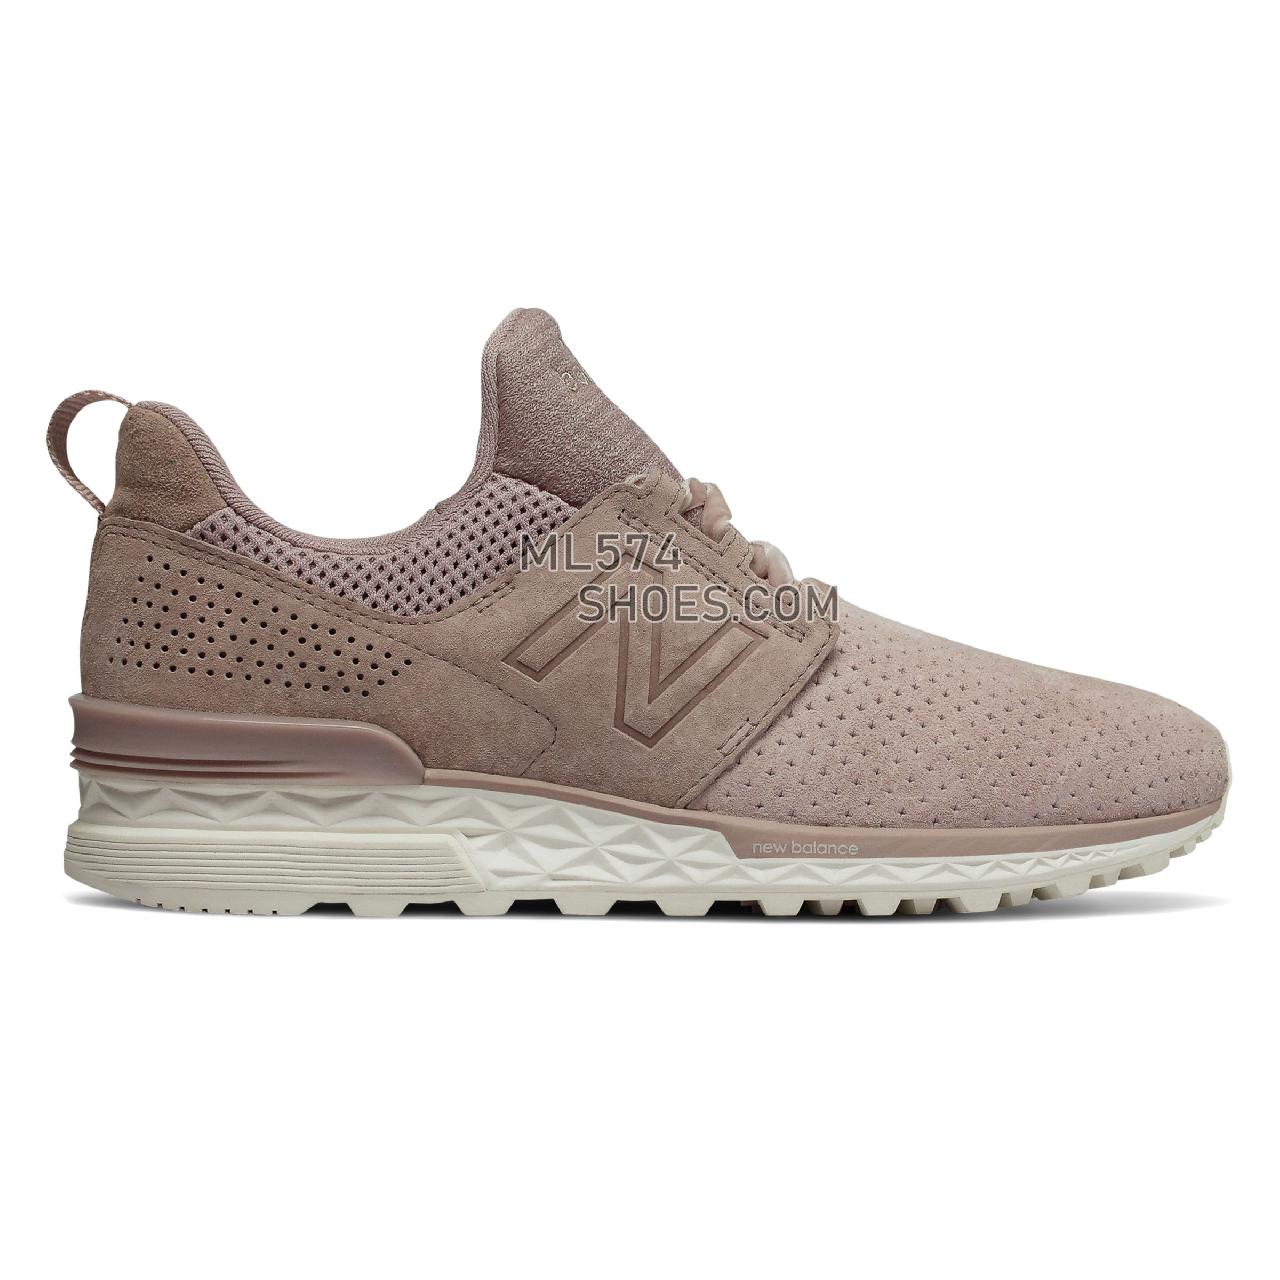 New Balance 574 Sport Decon - Women's 574 - Classic Conch Shell with Flat White - WS574DUK